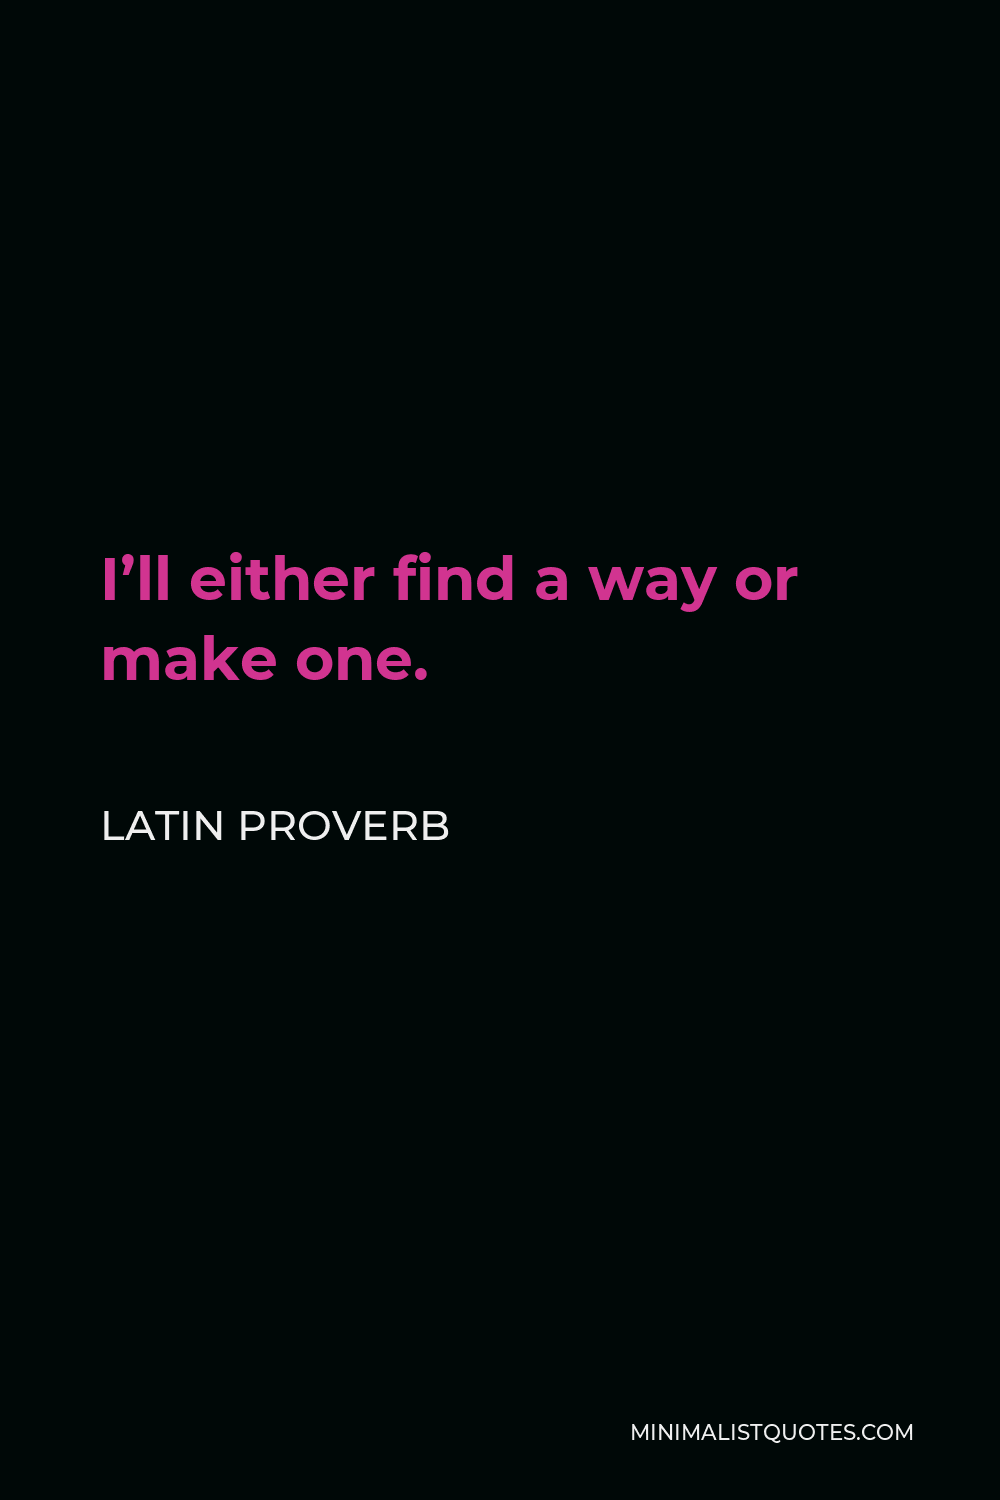 Latin Proverb Quote - I’ll either find a way or make one.